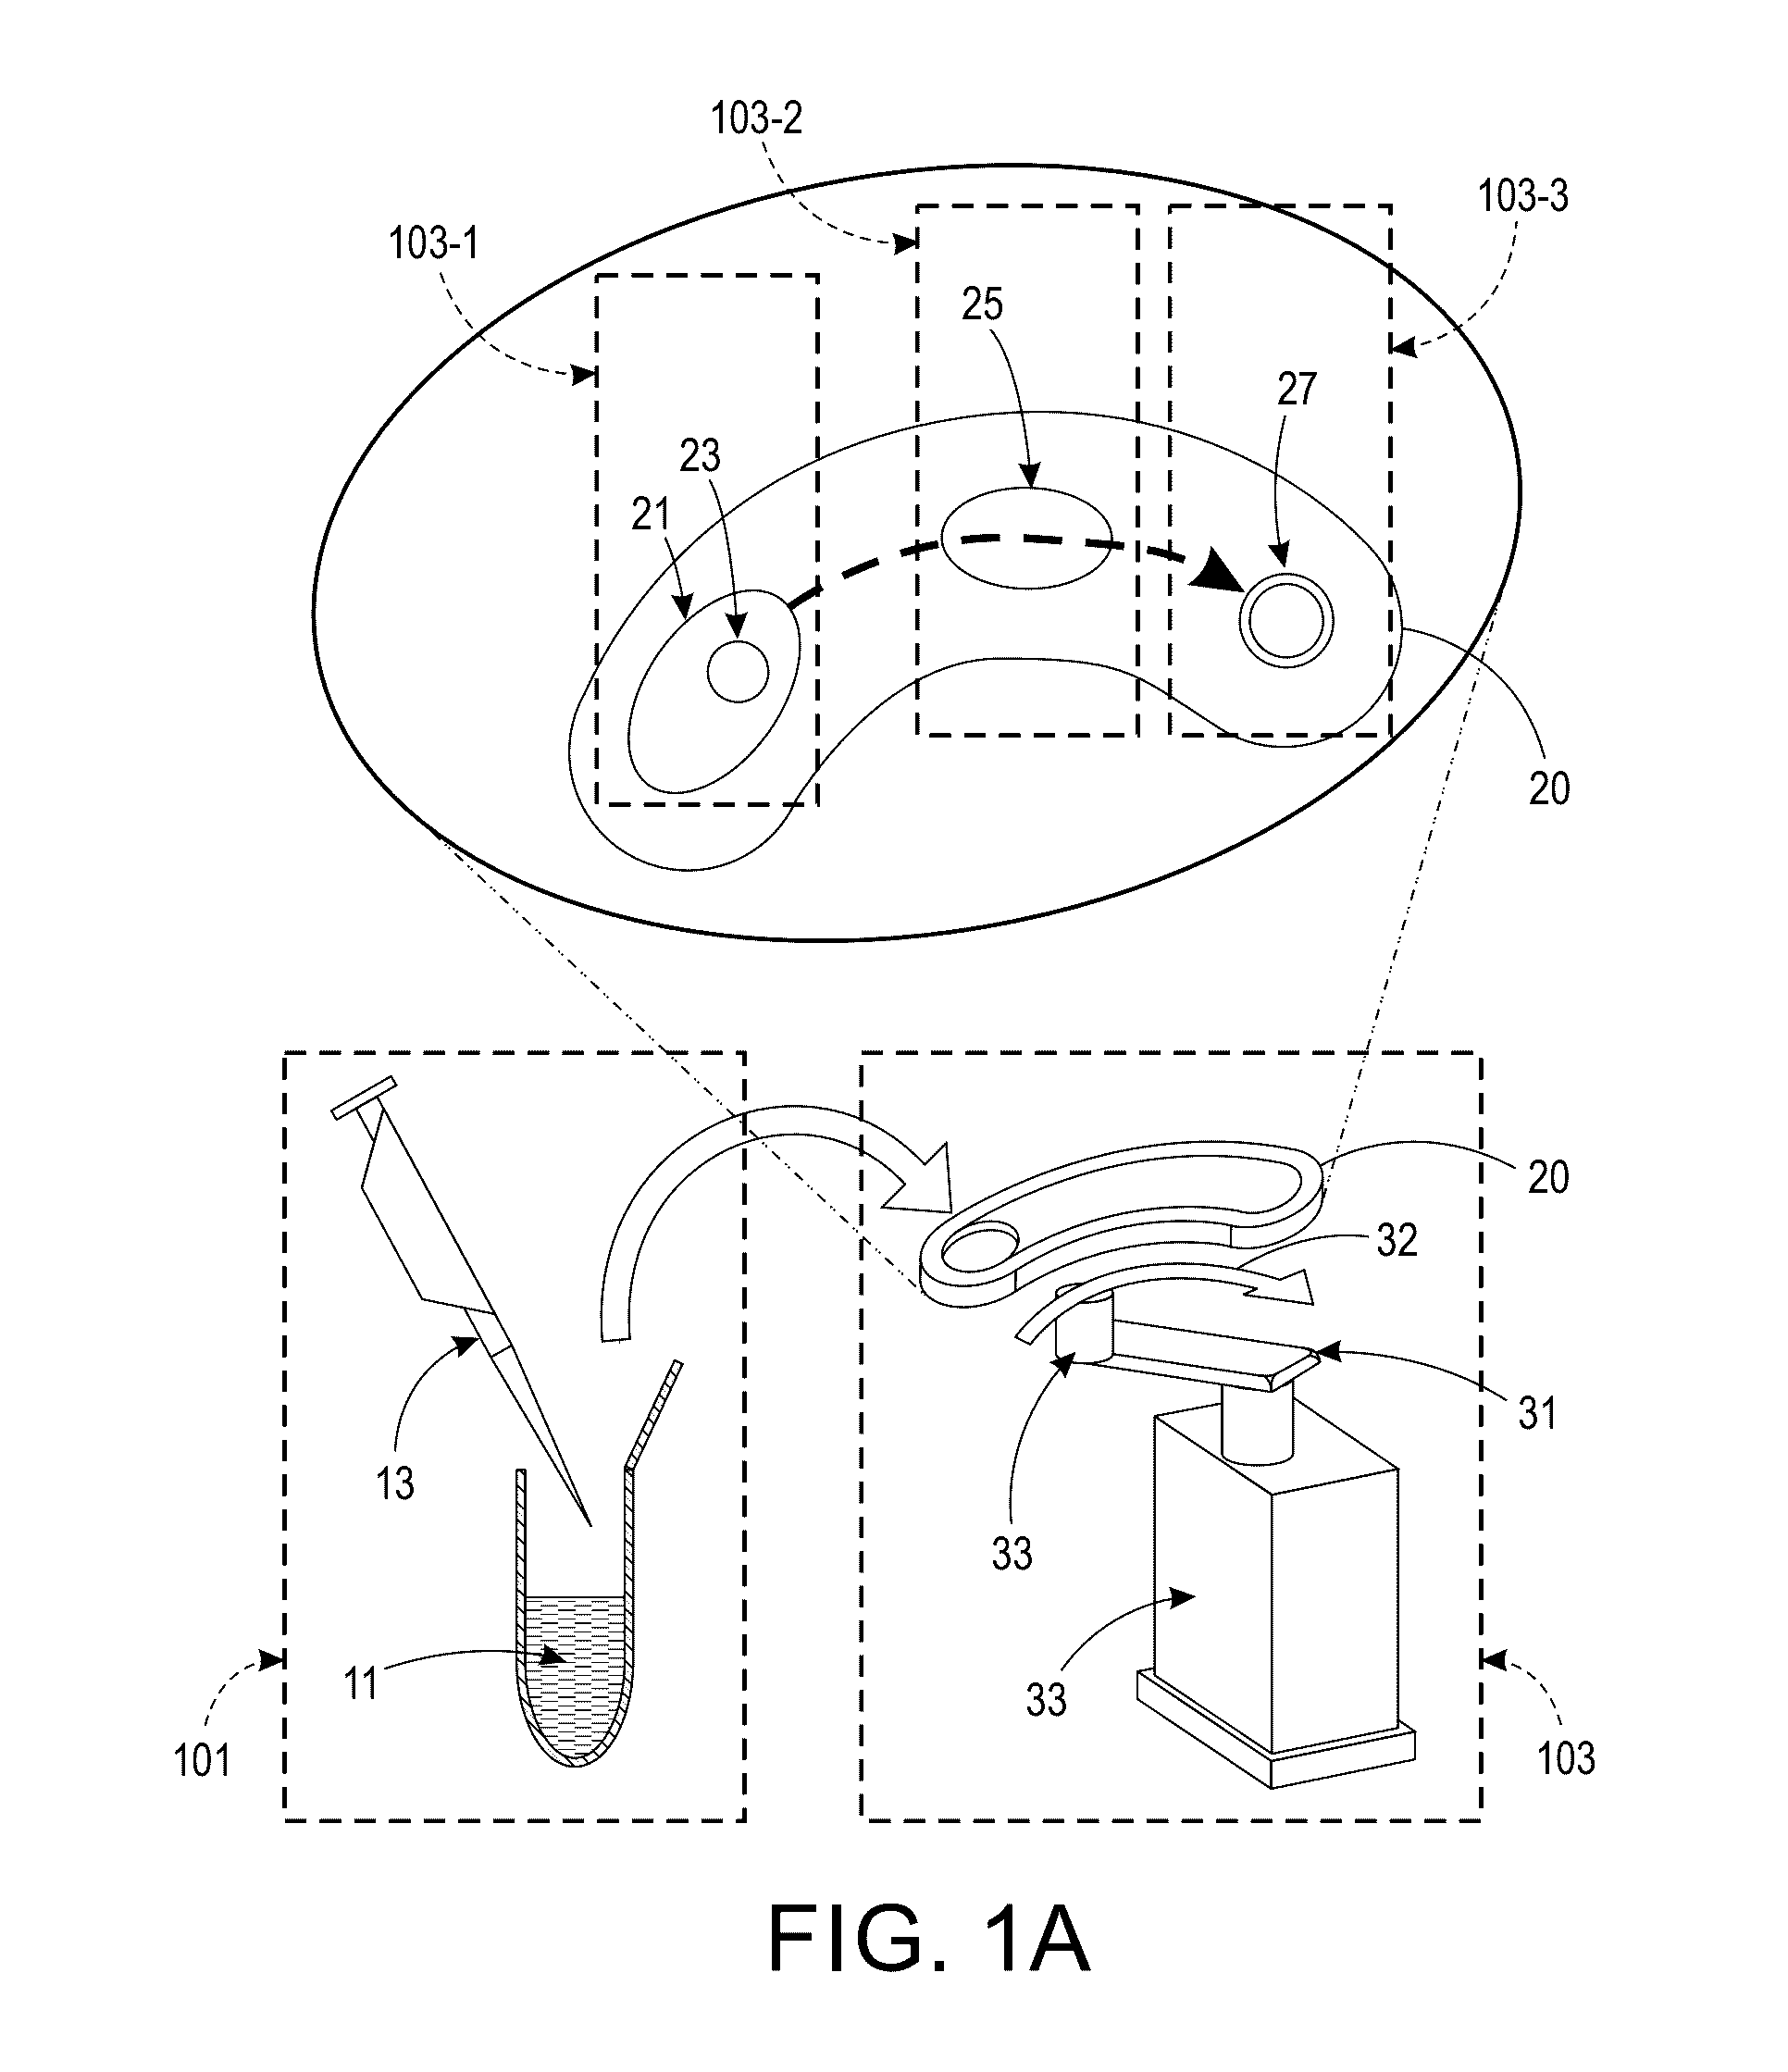 Self-contained cartridge and methods for integrated biochemical assay at the point-of-care